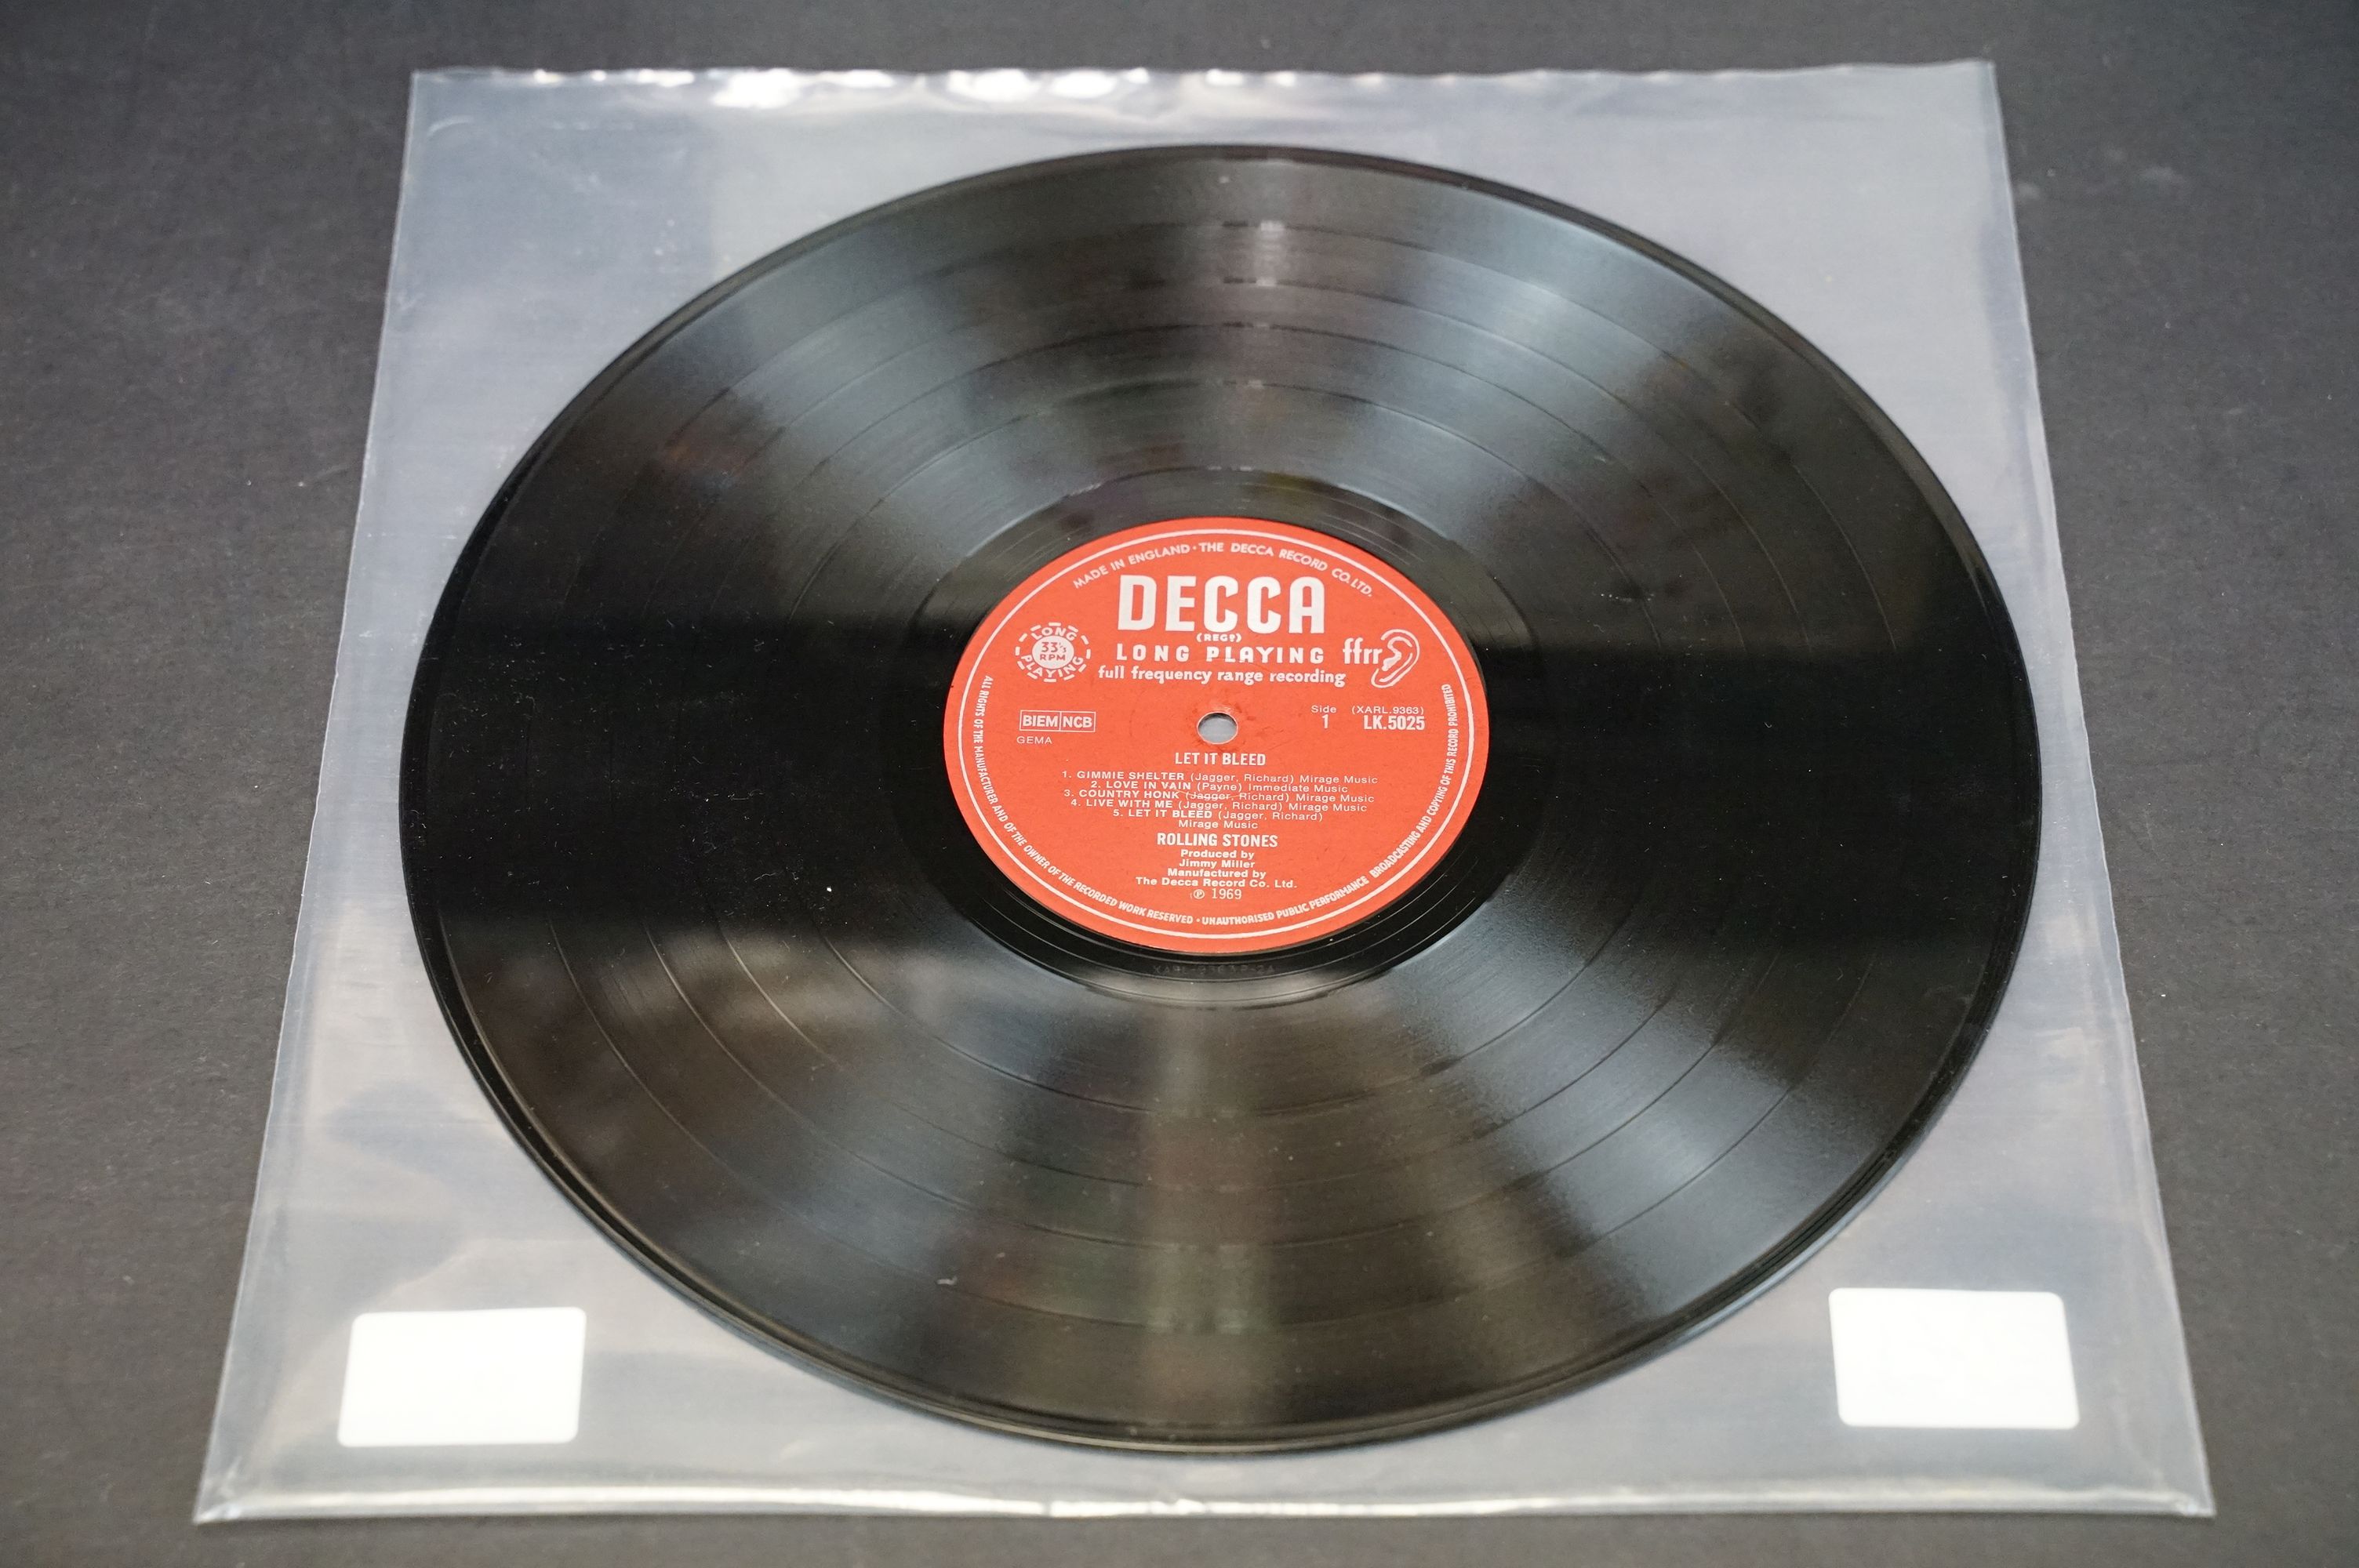 Vinyl - Rolling Stones Let It Bleed on Decca Records LK 5025. Mono pressing with unboxed Decca - Image 2 of 6